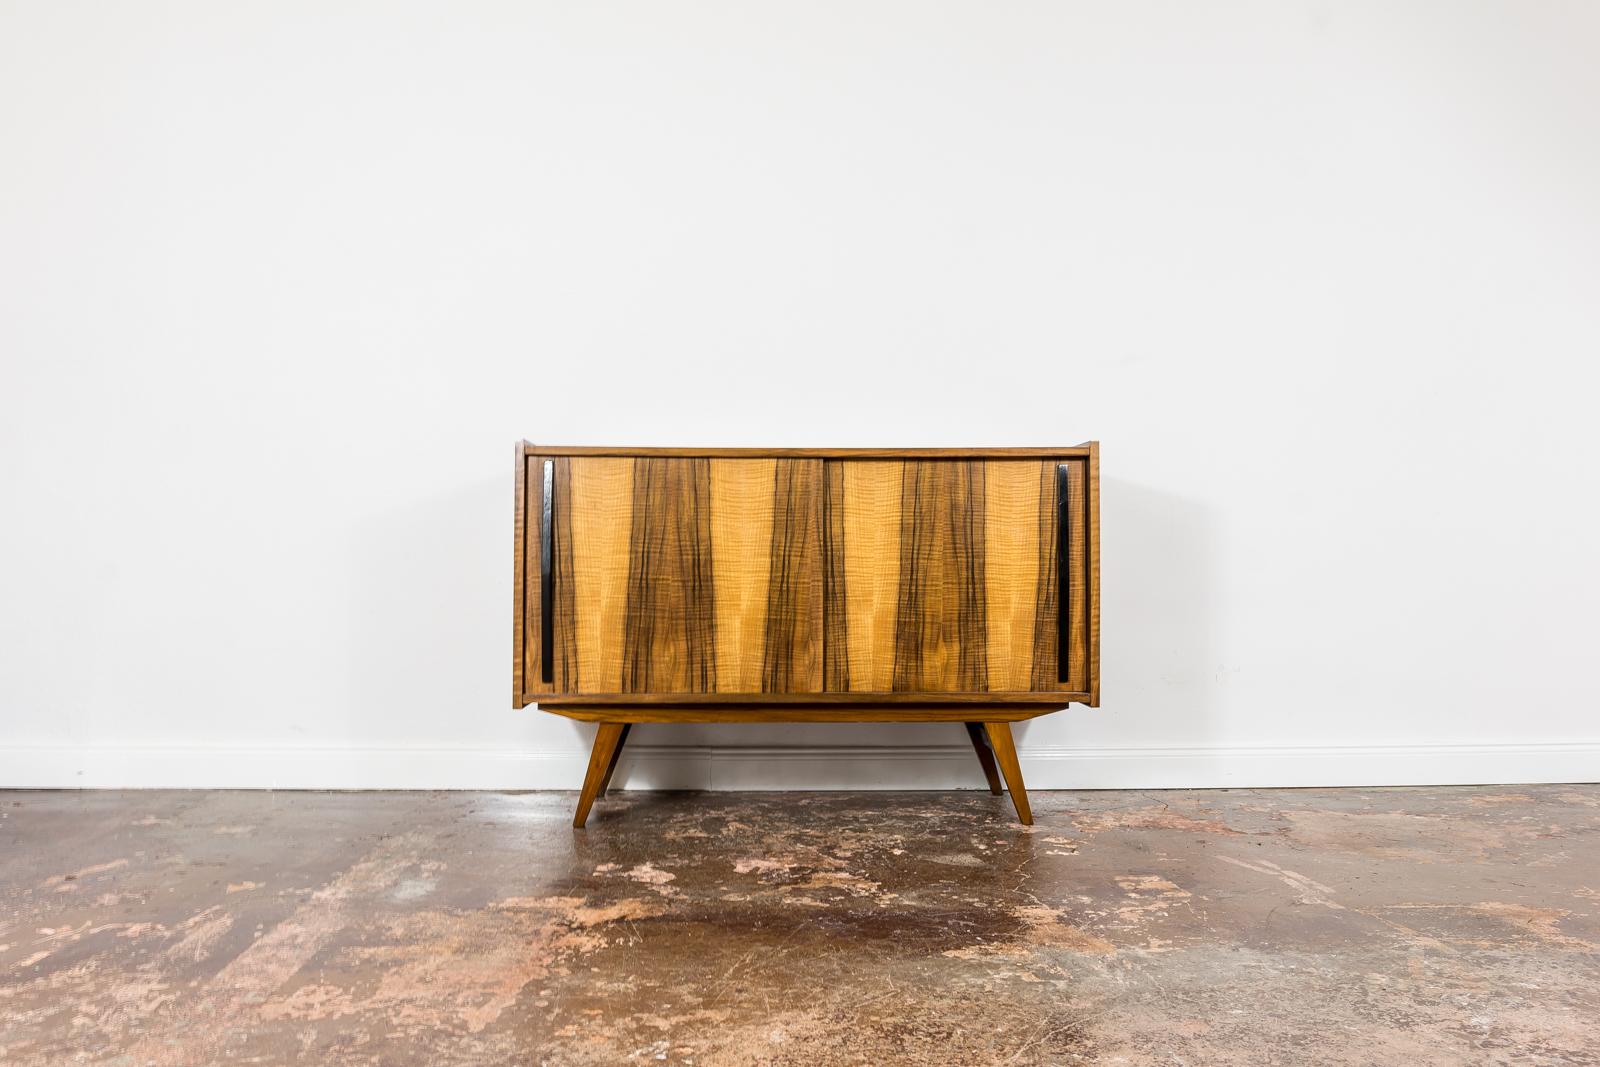 Walnut veneer sideboard from Słupskie Furniture Factory 1960's, Poland.
Sideboard has 2 sliding doors with black handles, and removable shelf.
Case raised on solid wooden construction and legs.
This item has been restored and refinished enhancing